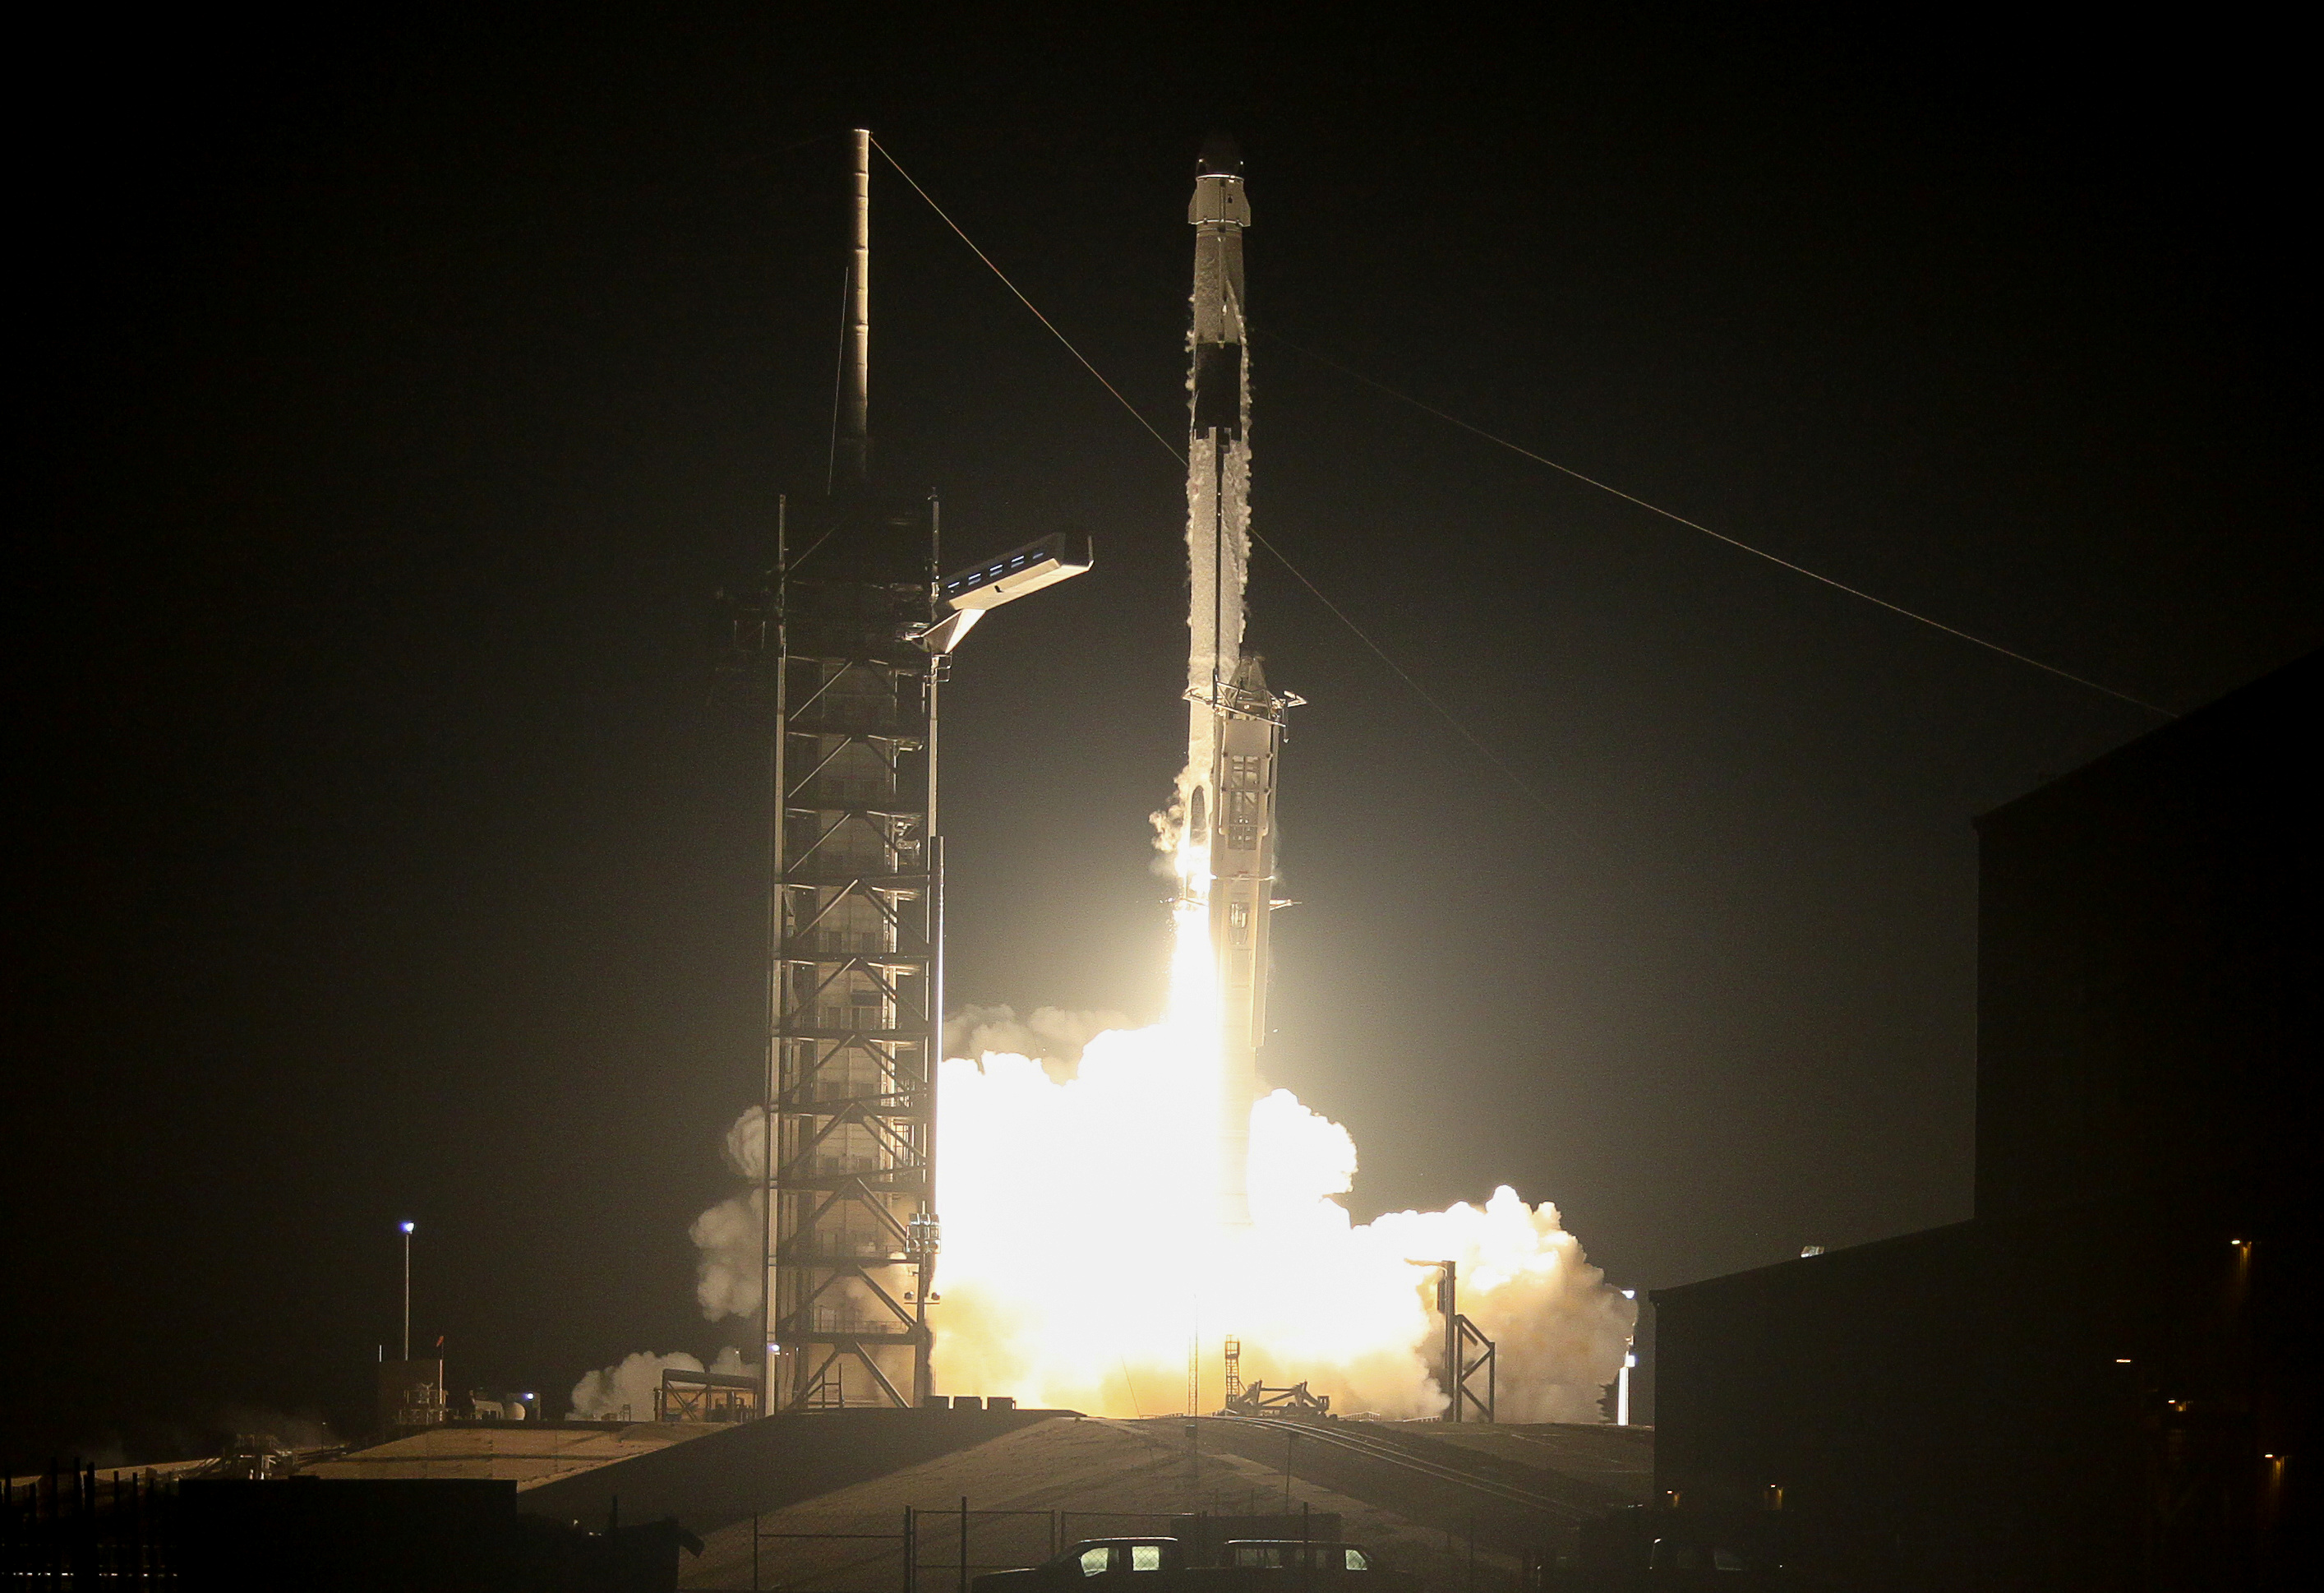 2019 03 02T164702Z_56528315_RC1AC553B710_RTRMADP_3_SPACE SPACEX